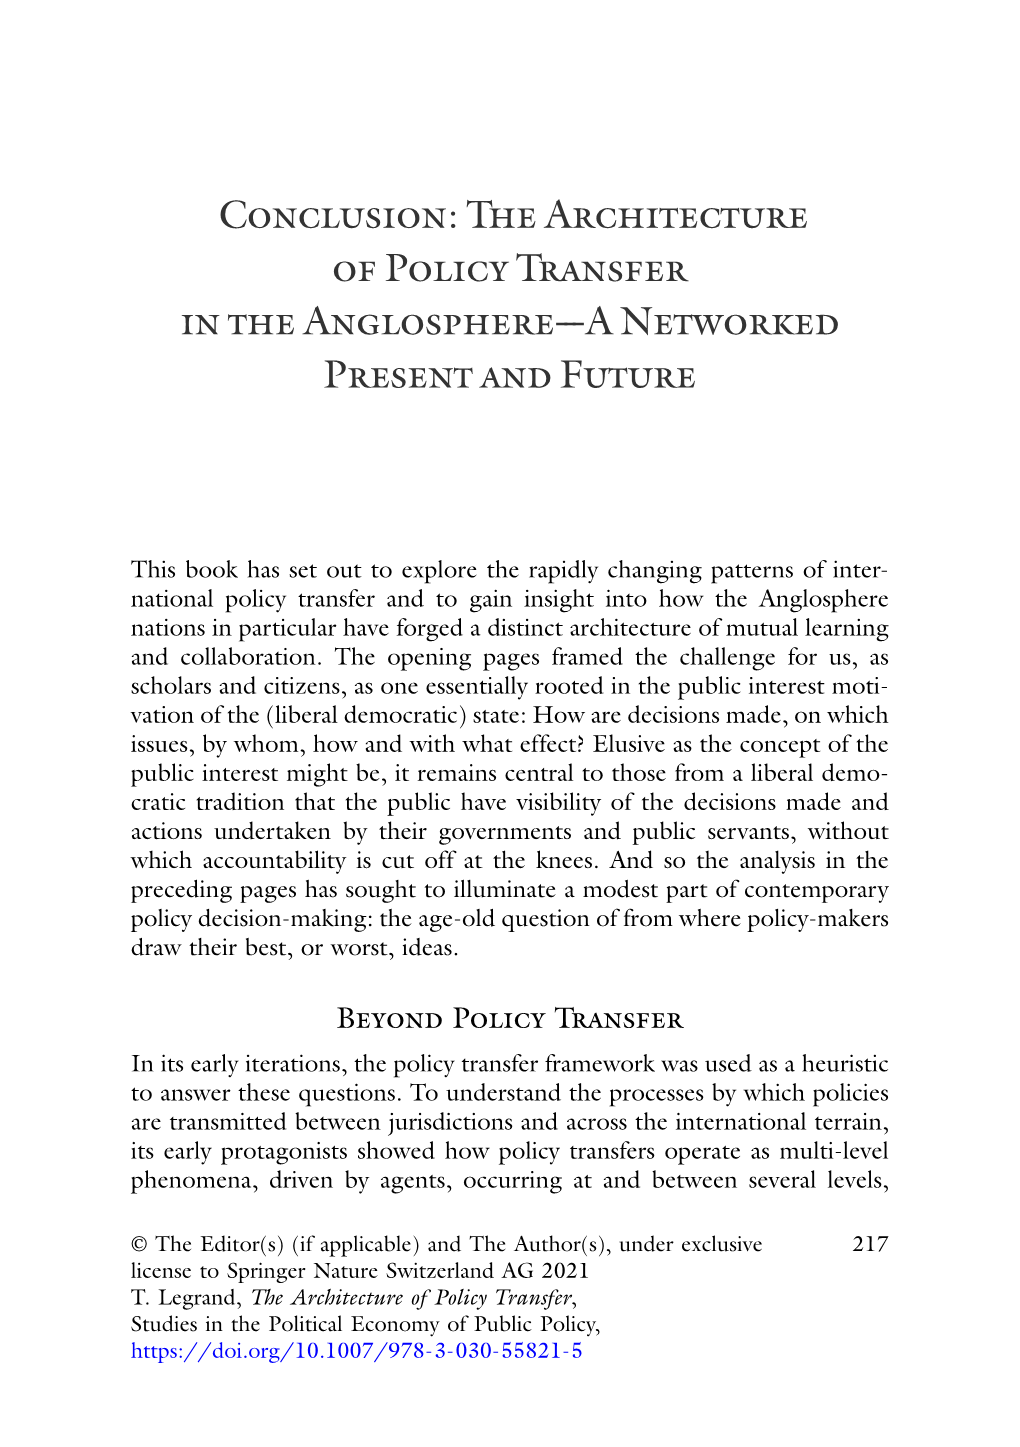 Conclusion: the Architecture of Policy Transfer in the Anglosphere---A Networked Present and Future